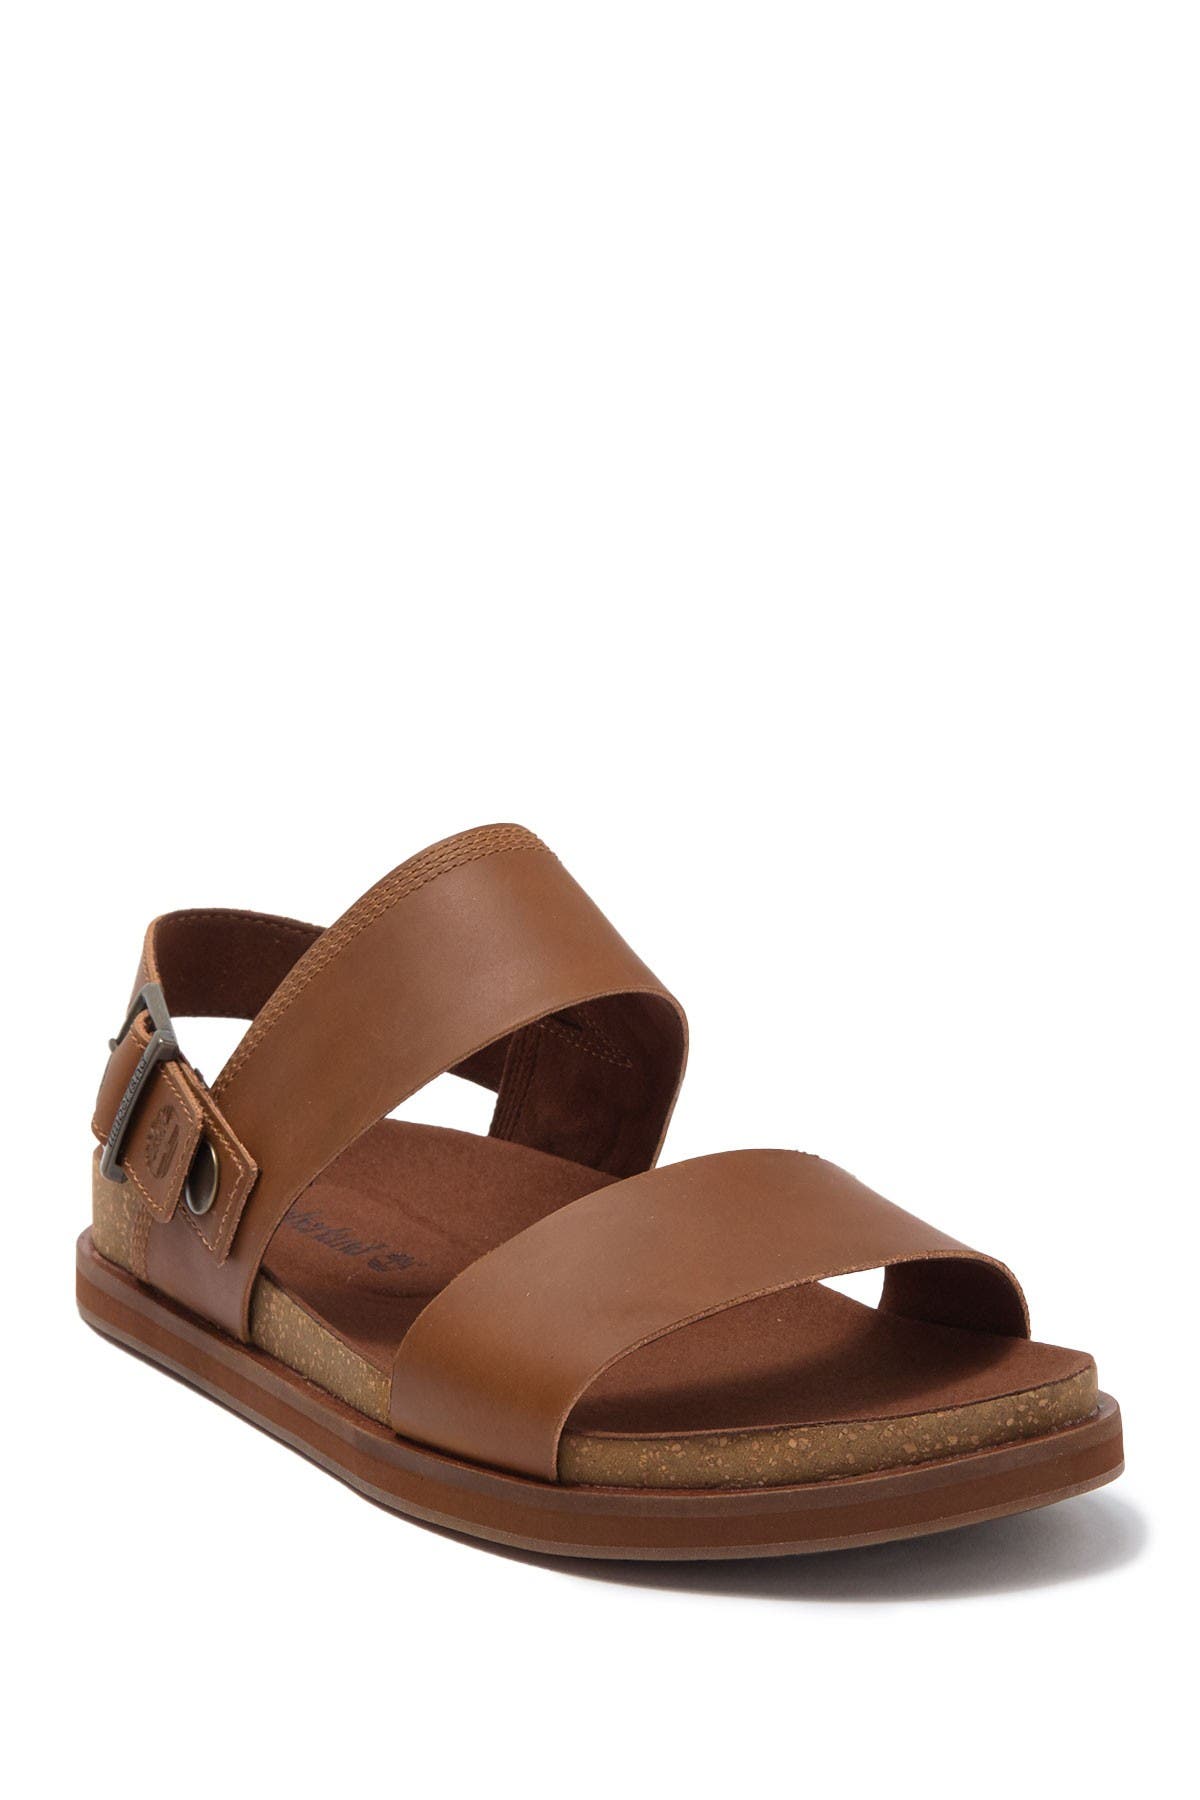 timberland leather sandals